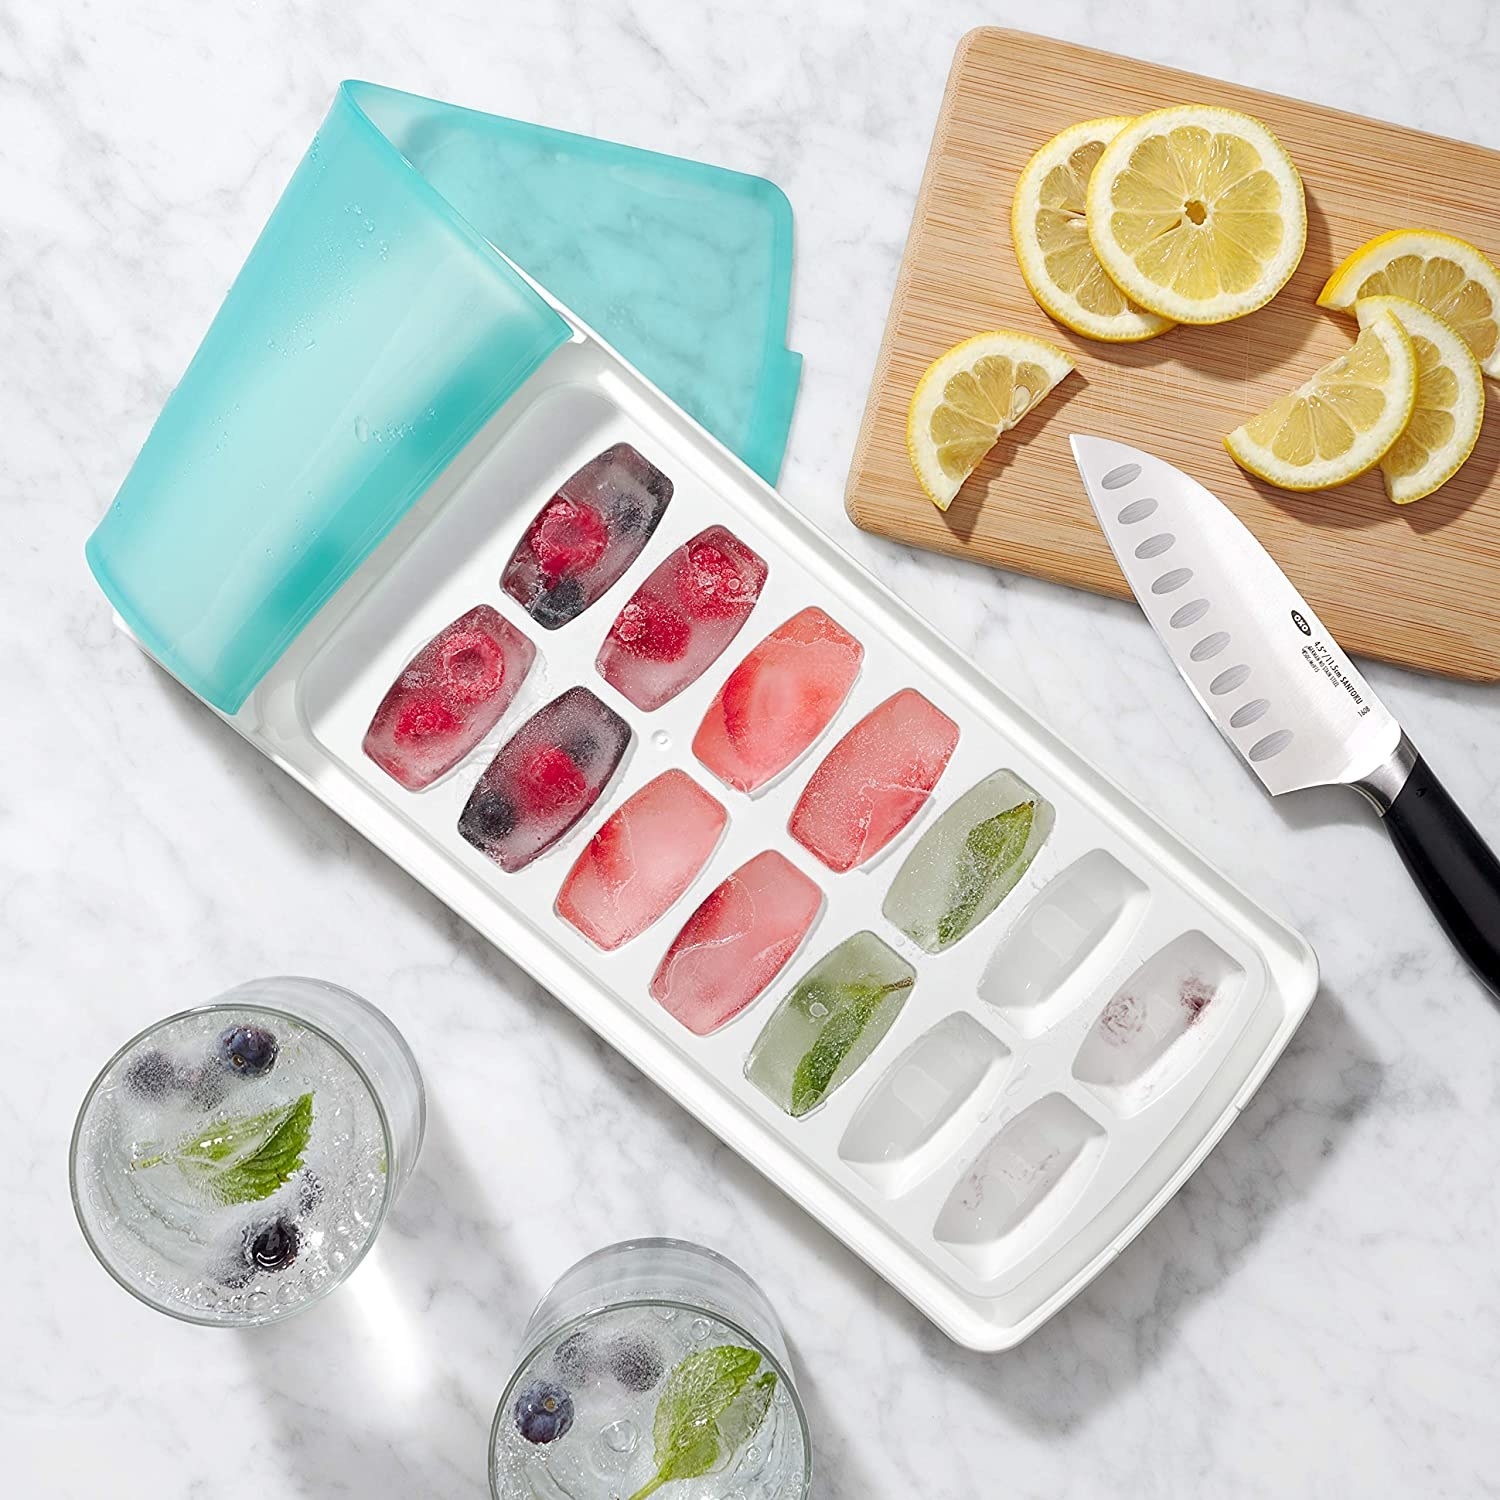 the ice tray with the flexible silicone lid peeled back to show the cubes